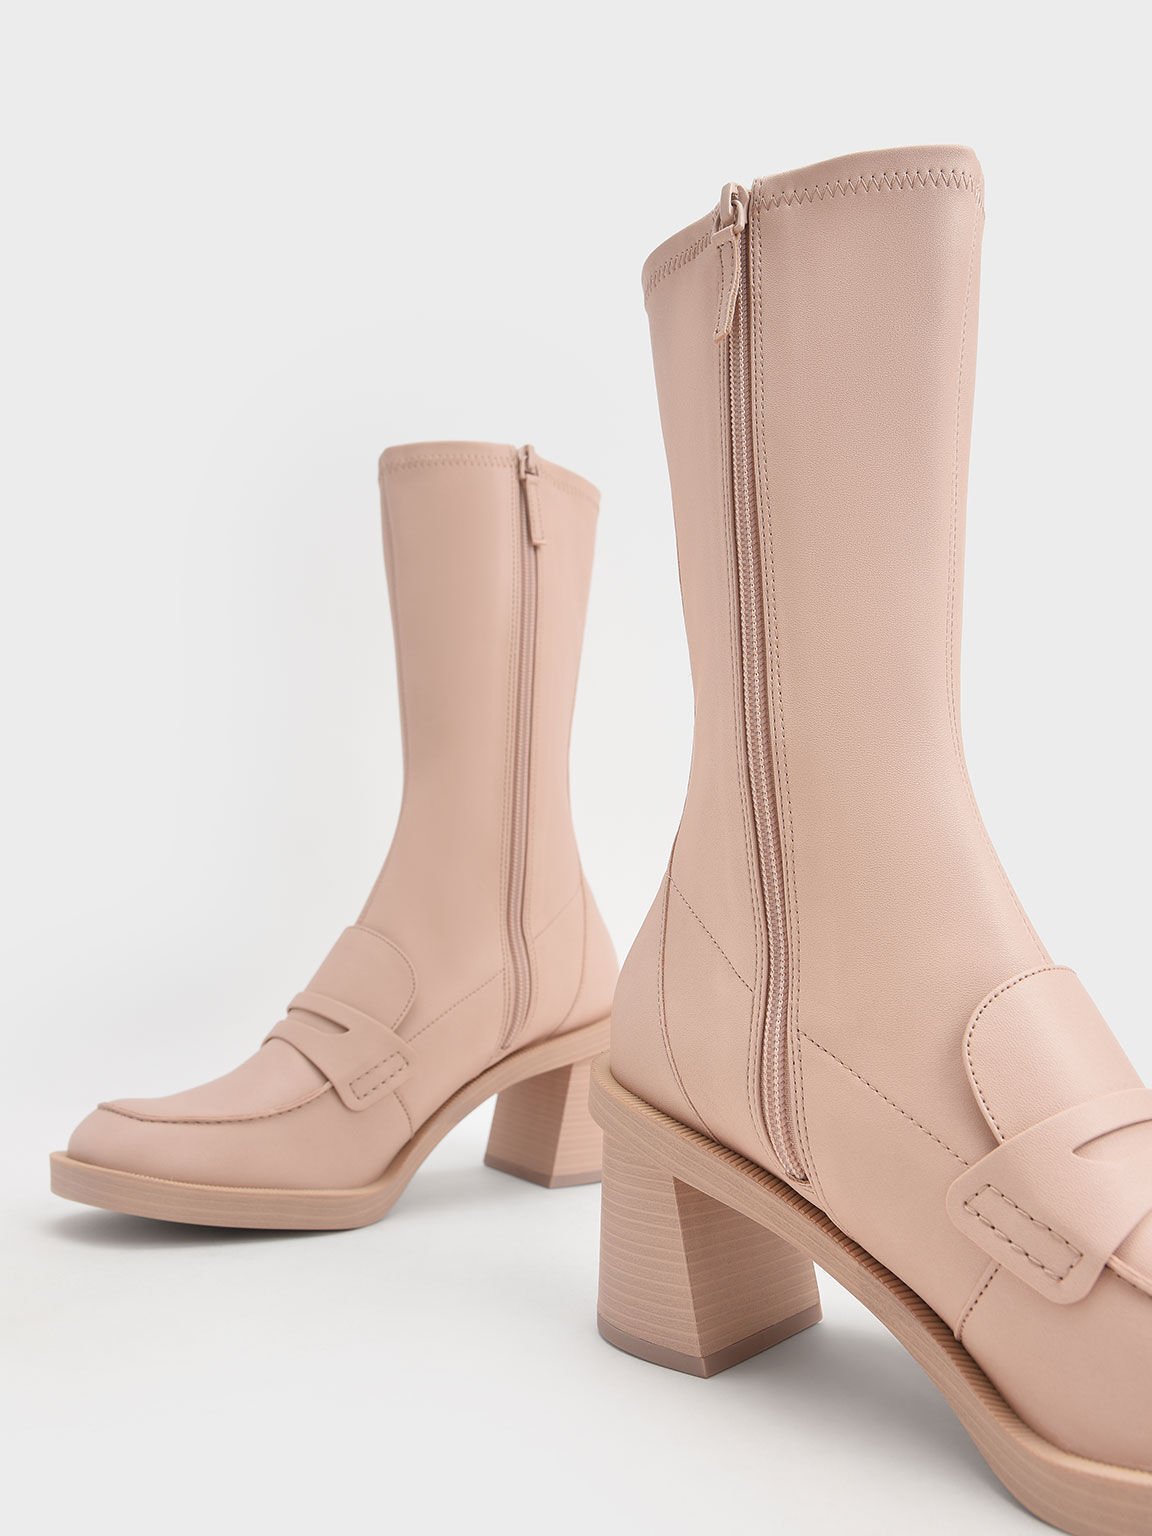 Haisley Penny Loafer Calf Boots, Pink, hi-res